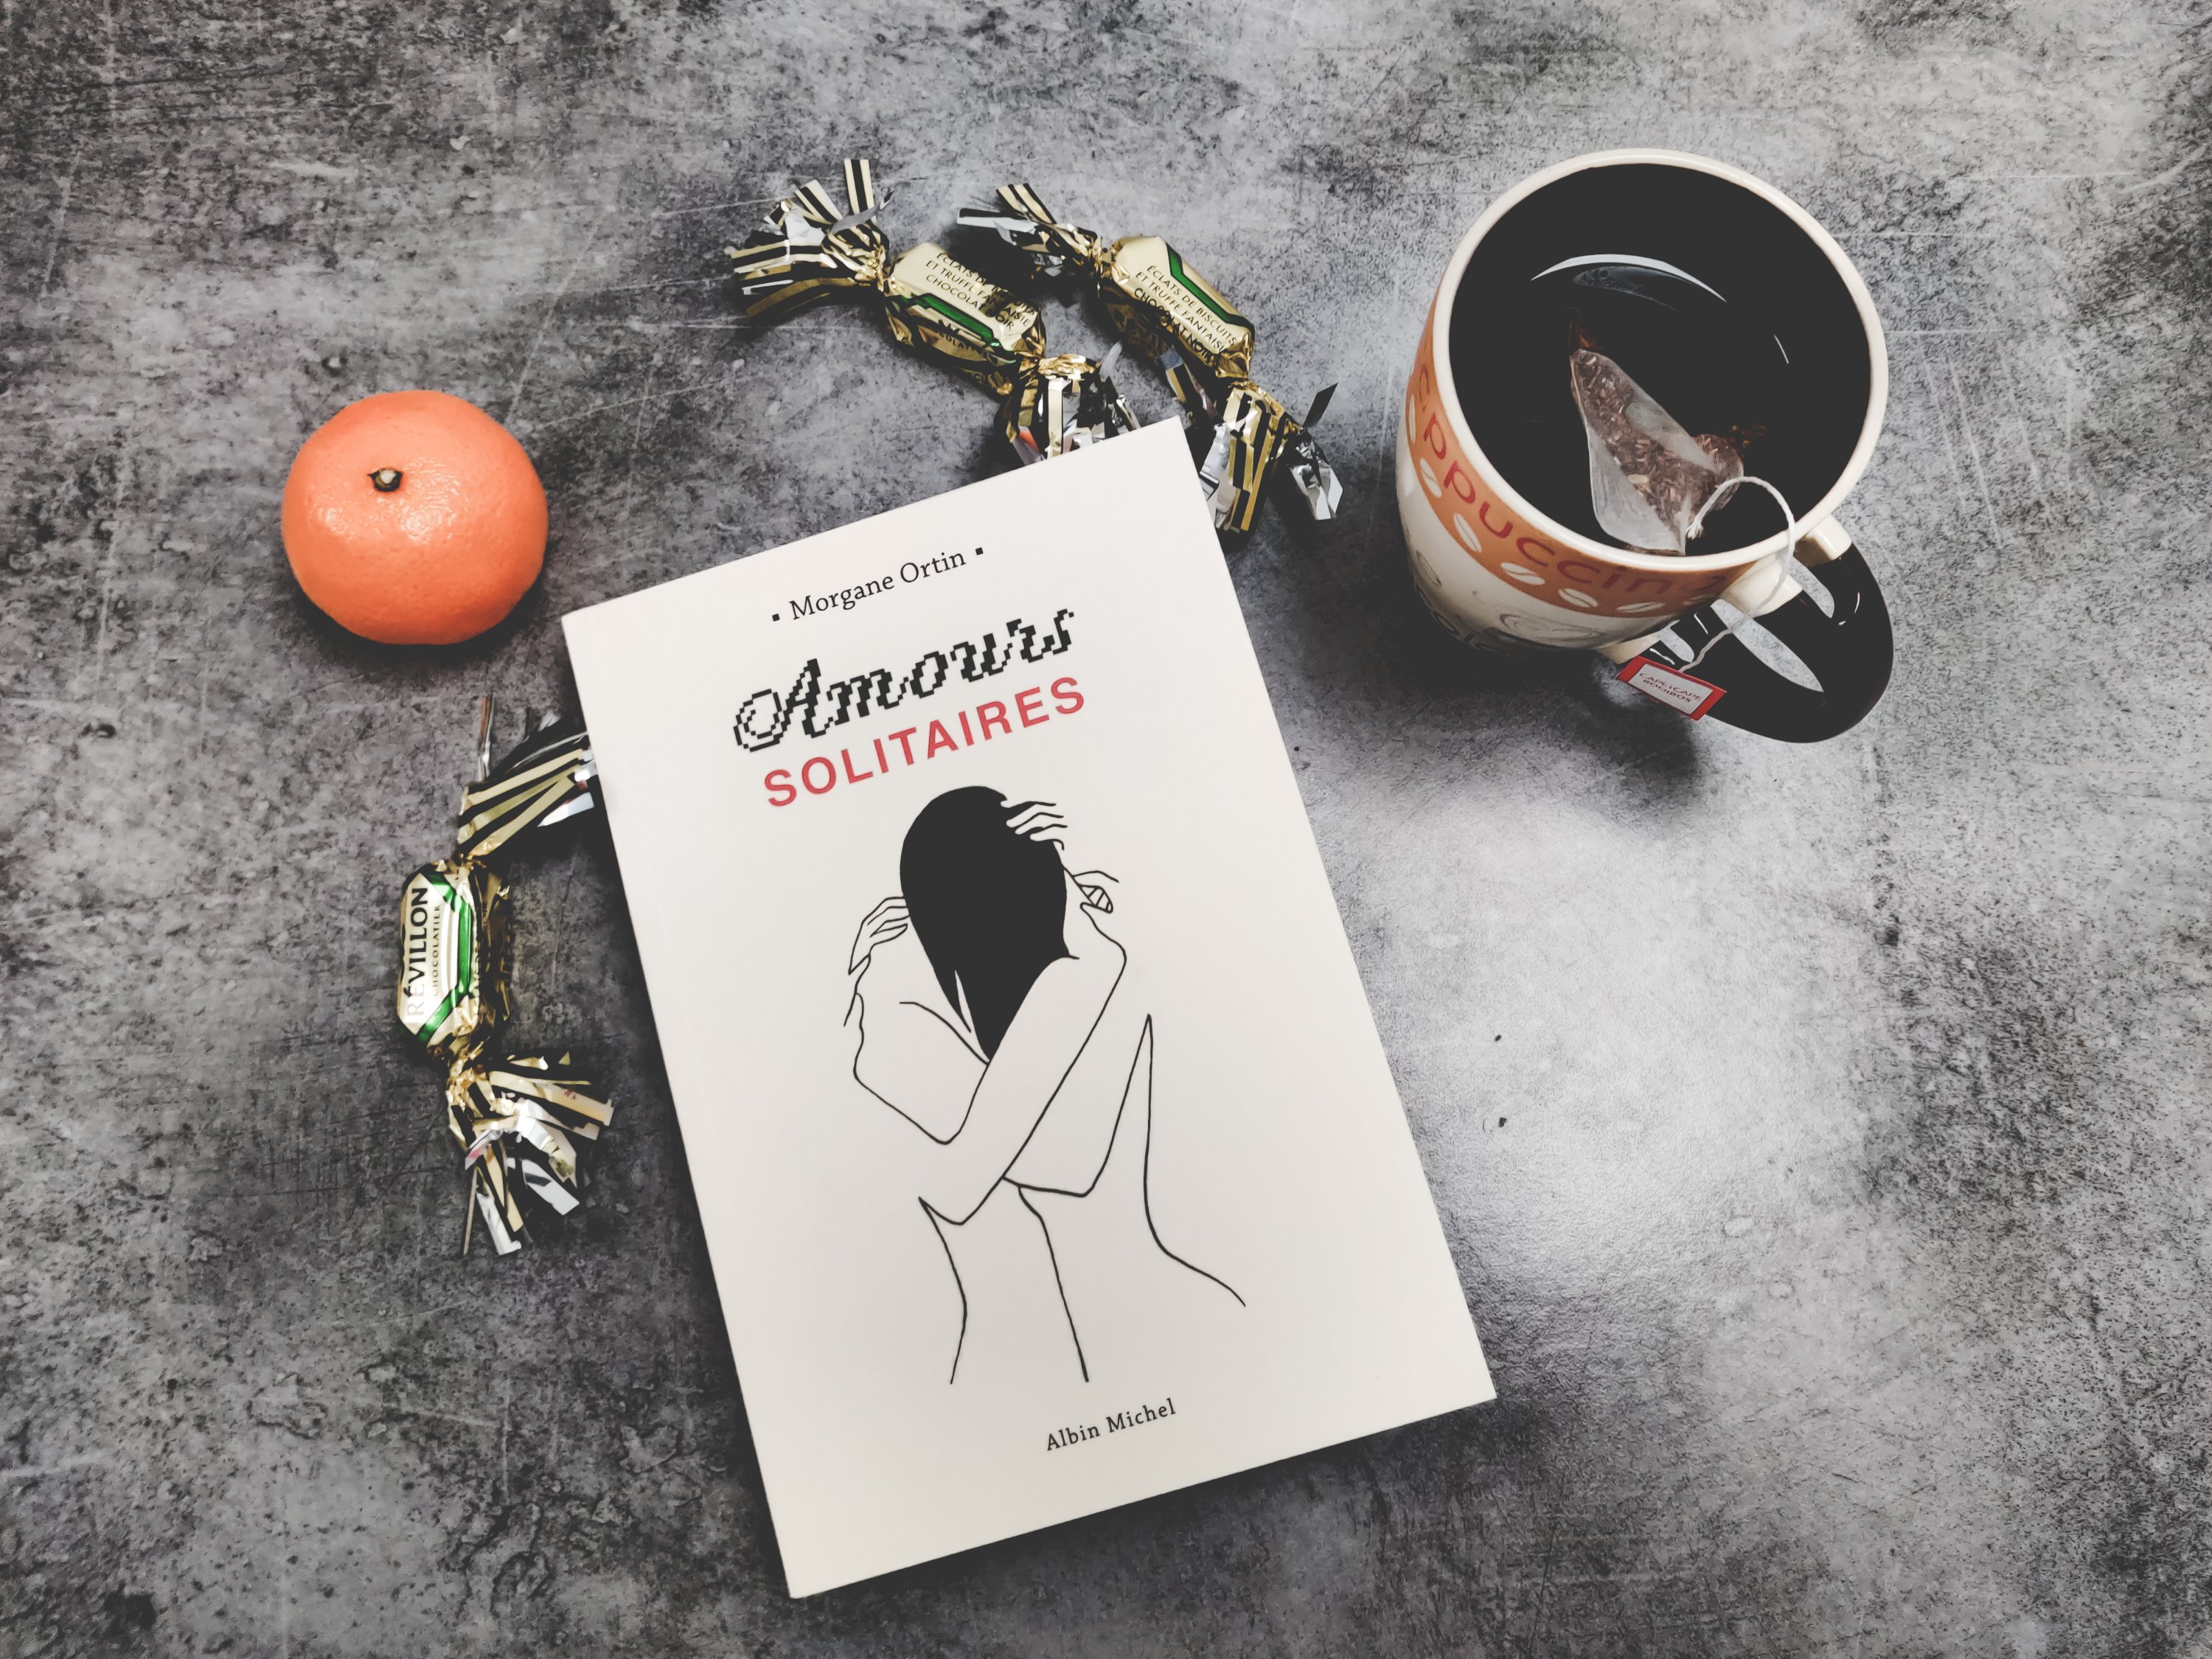  Amours solitaires - Ortin, Morgane - Livres